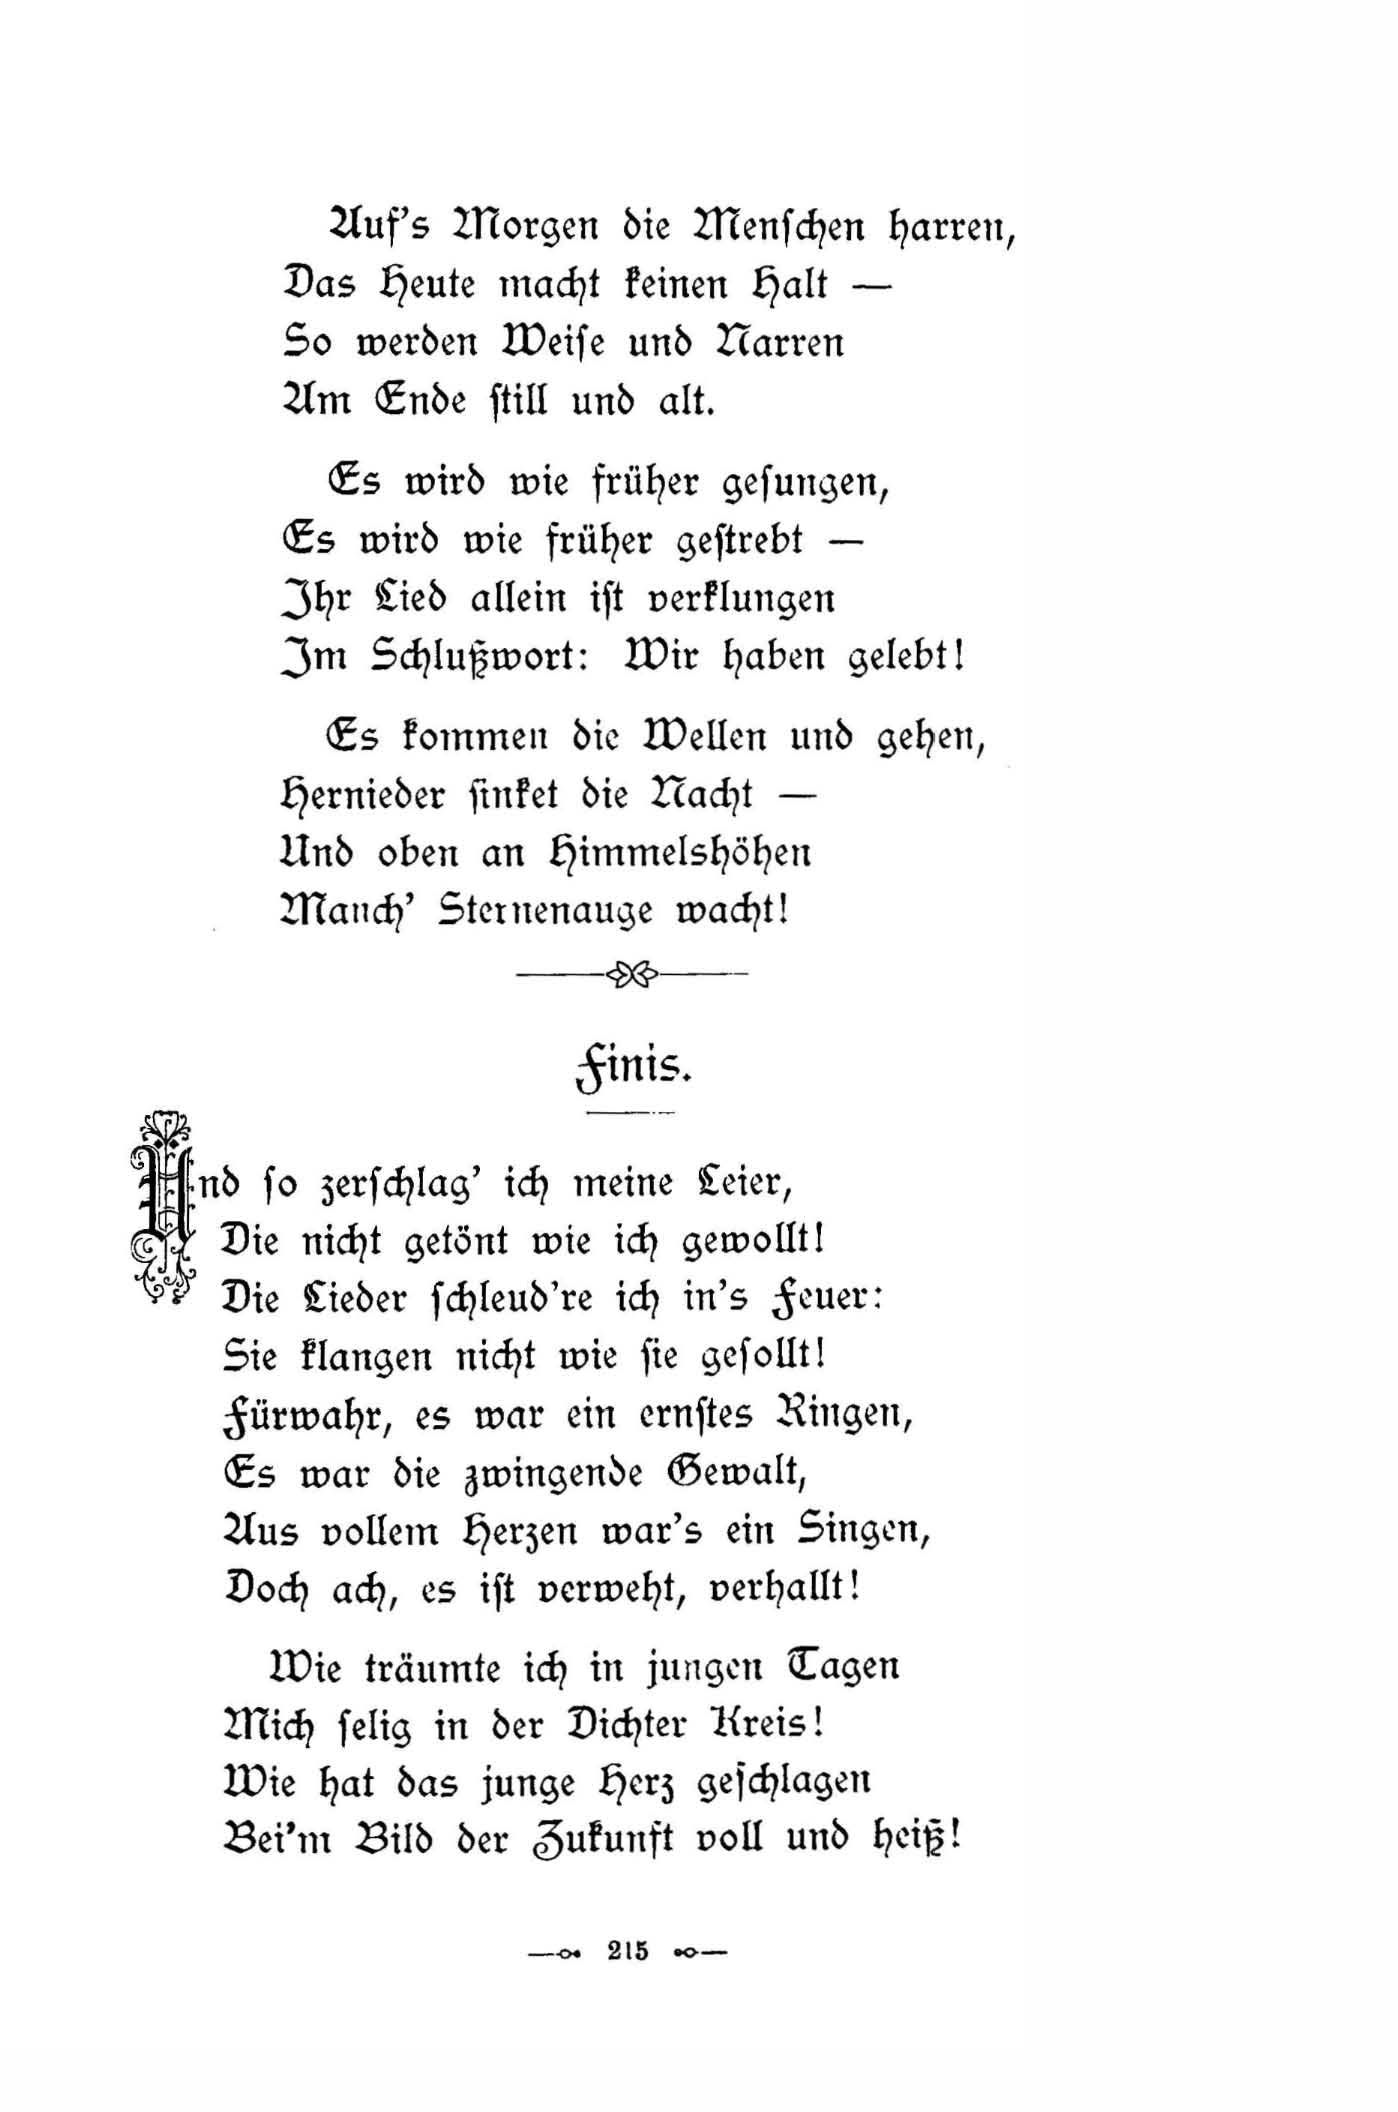 Der Narr (1896) | 2. (215) Main body of text